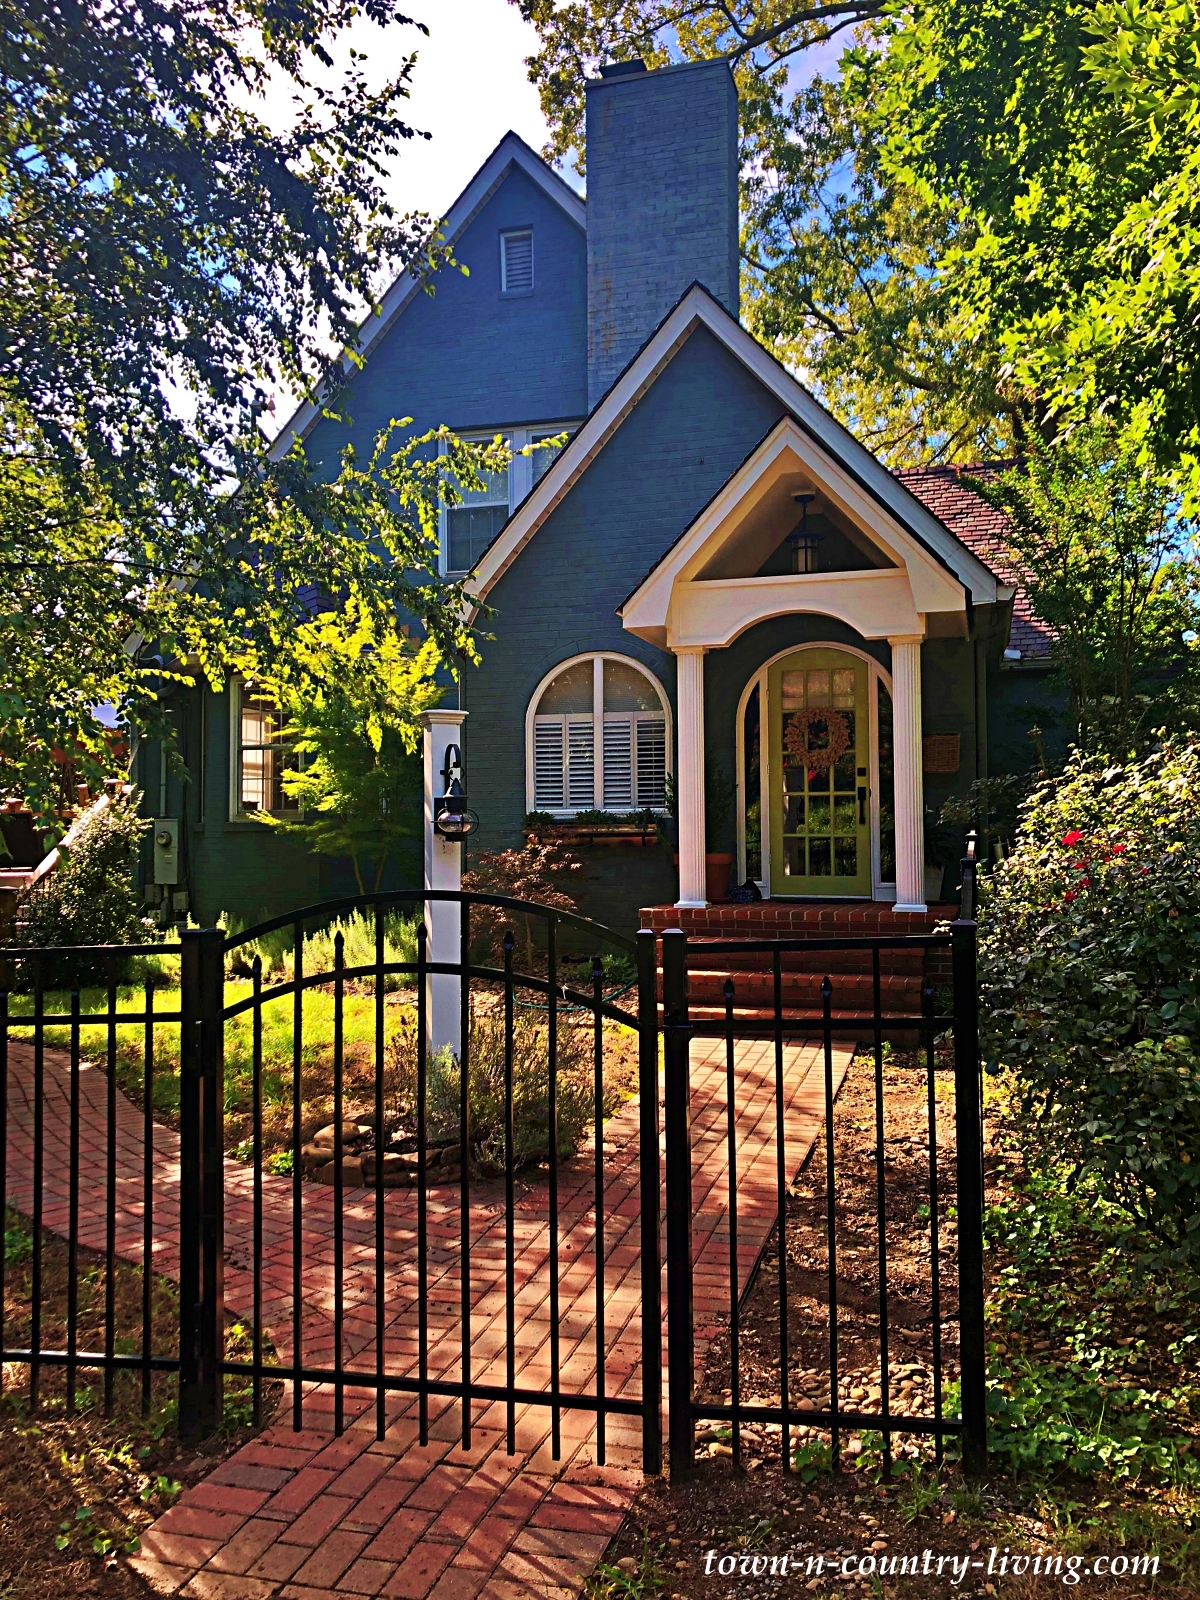 The Charming Homes of Maryville, Tennessee